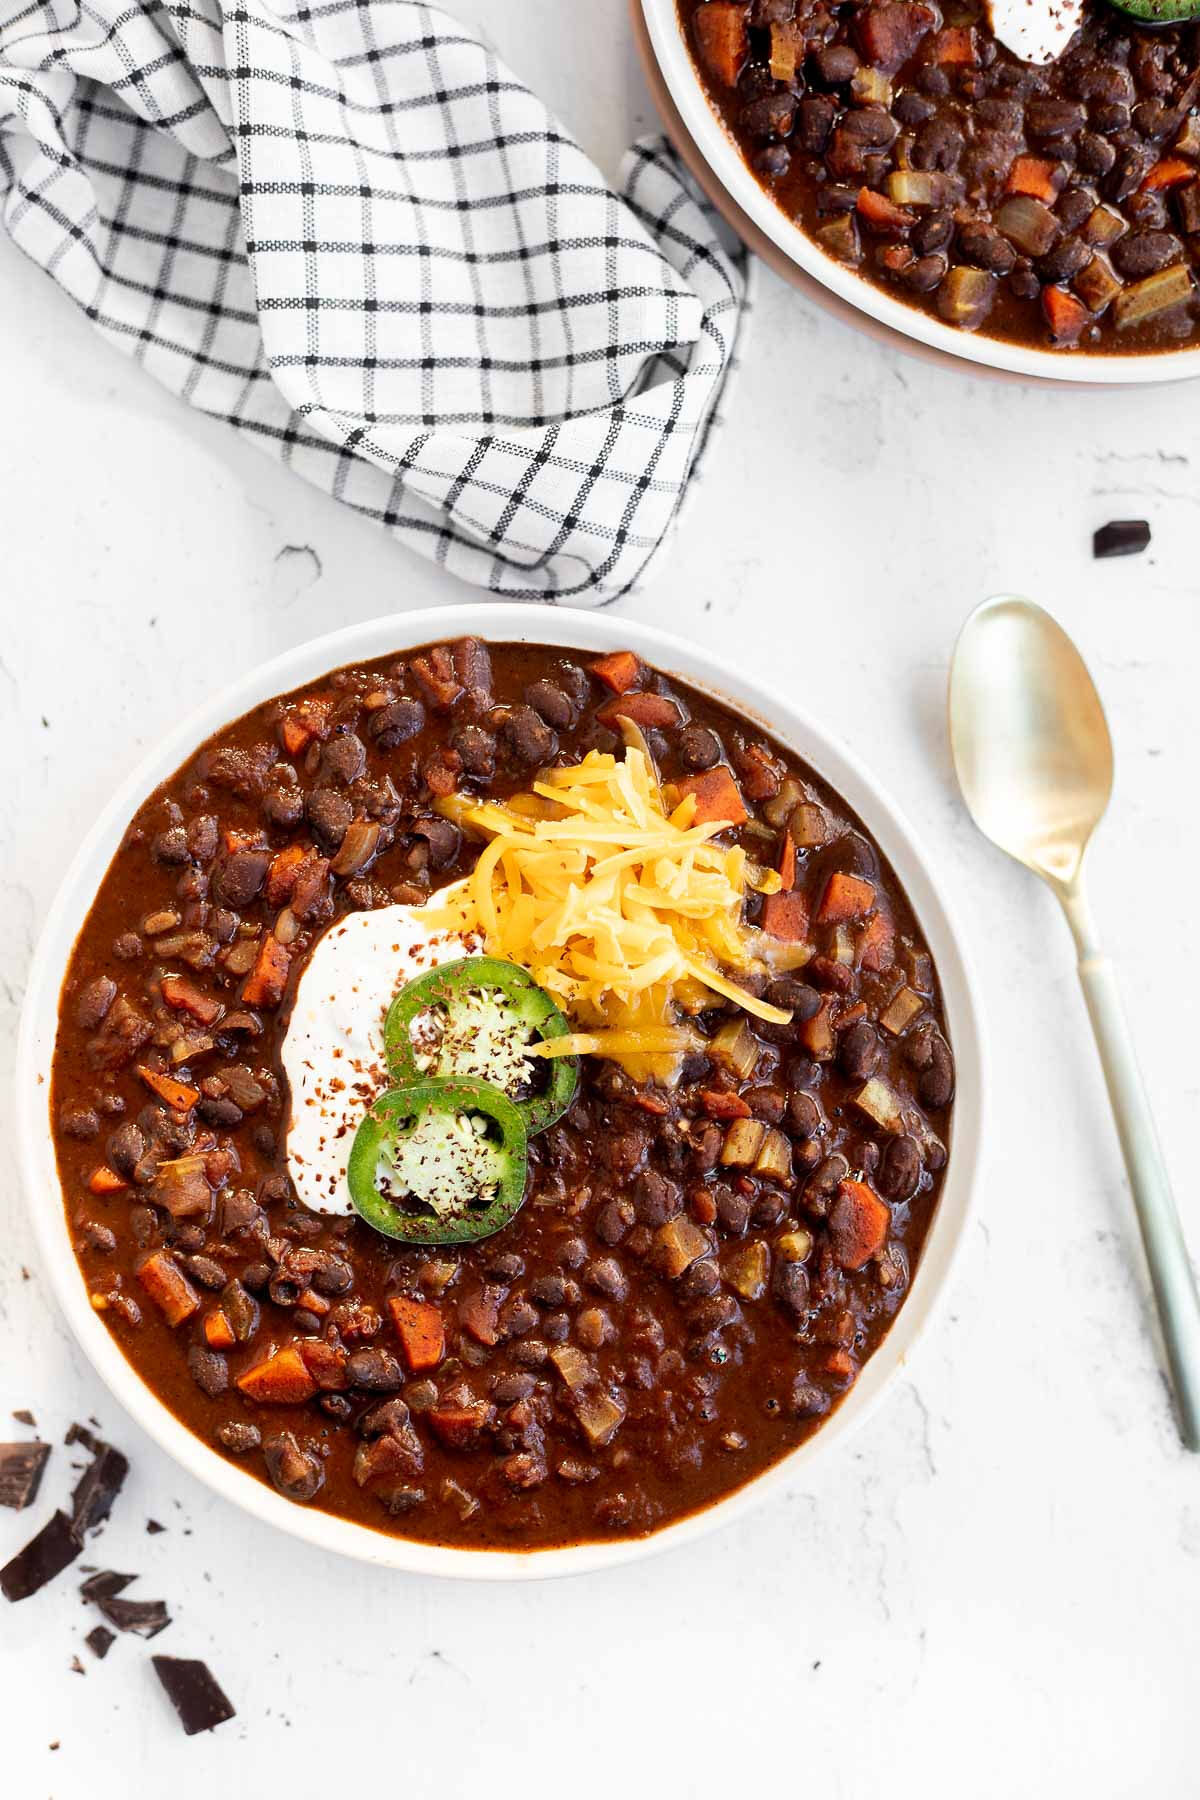 Black Bean Chili with Chocolate in a white bowl garnished with jalapeno slices, sour cream, and shredded cheddar, top view.